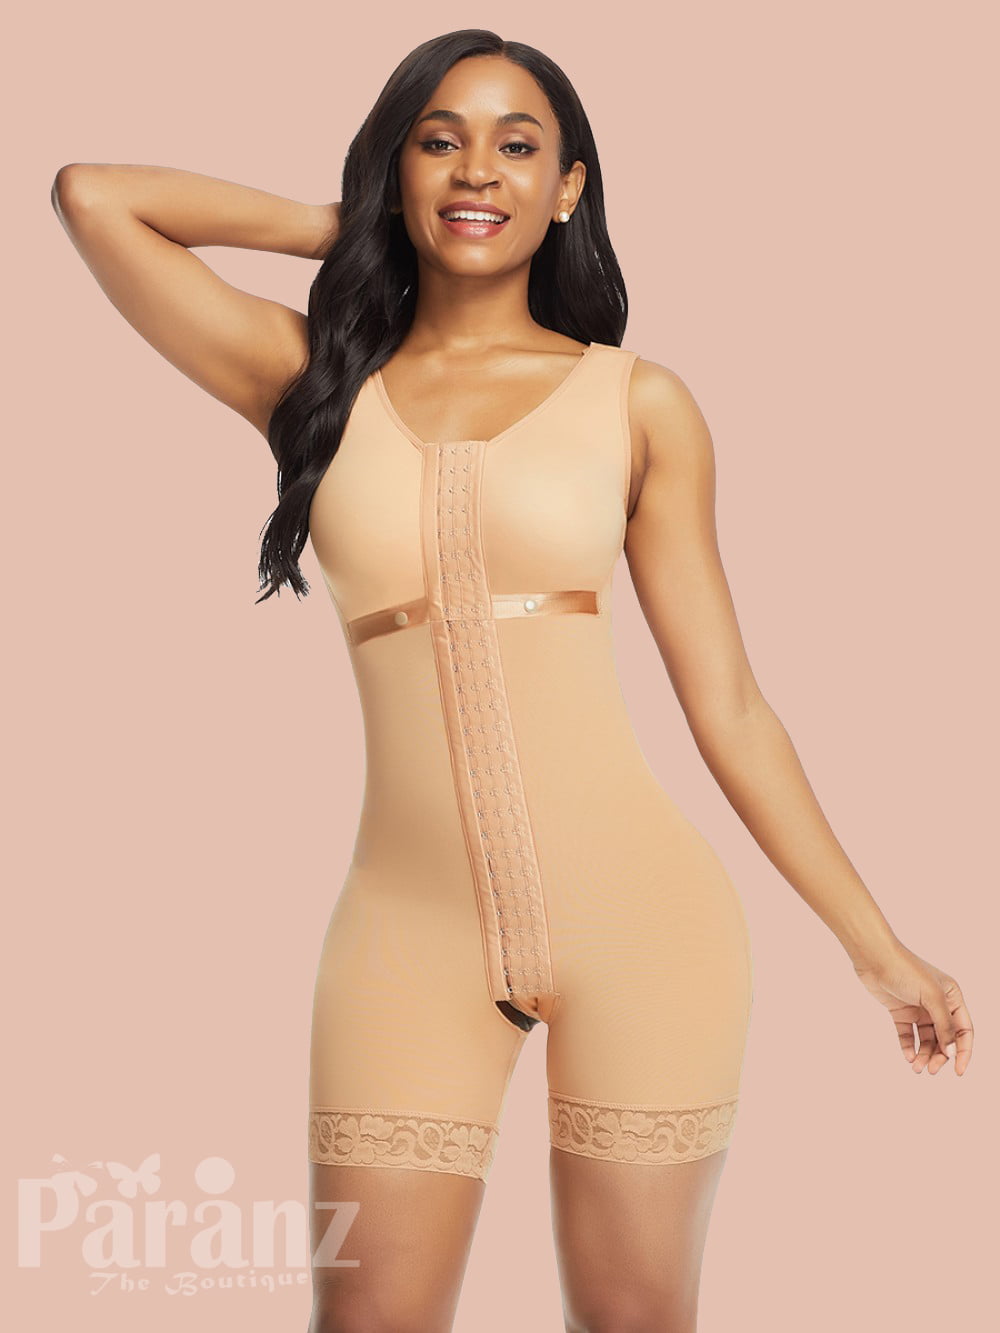 https://paranz.com/wp-content/uploads/2021/08/Skin-Color-Wide-Straps-Crotchless-Full-Bodyshaper-Hooks-For-Weight-Loss-views.jpg